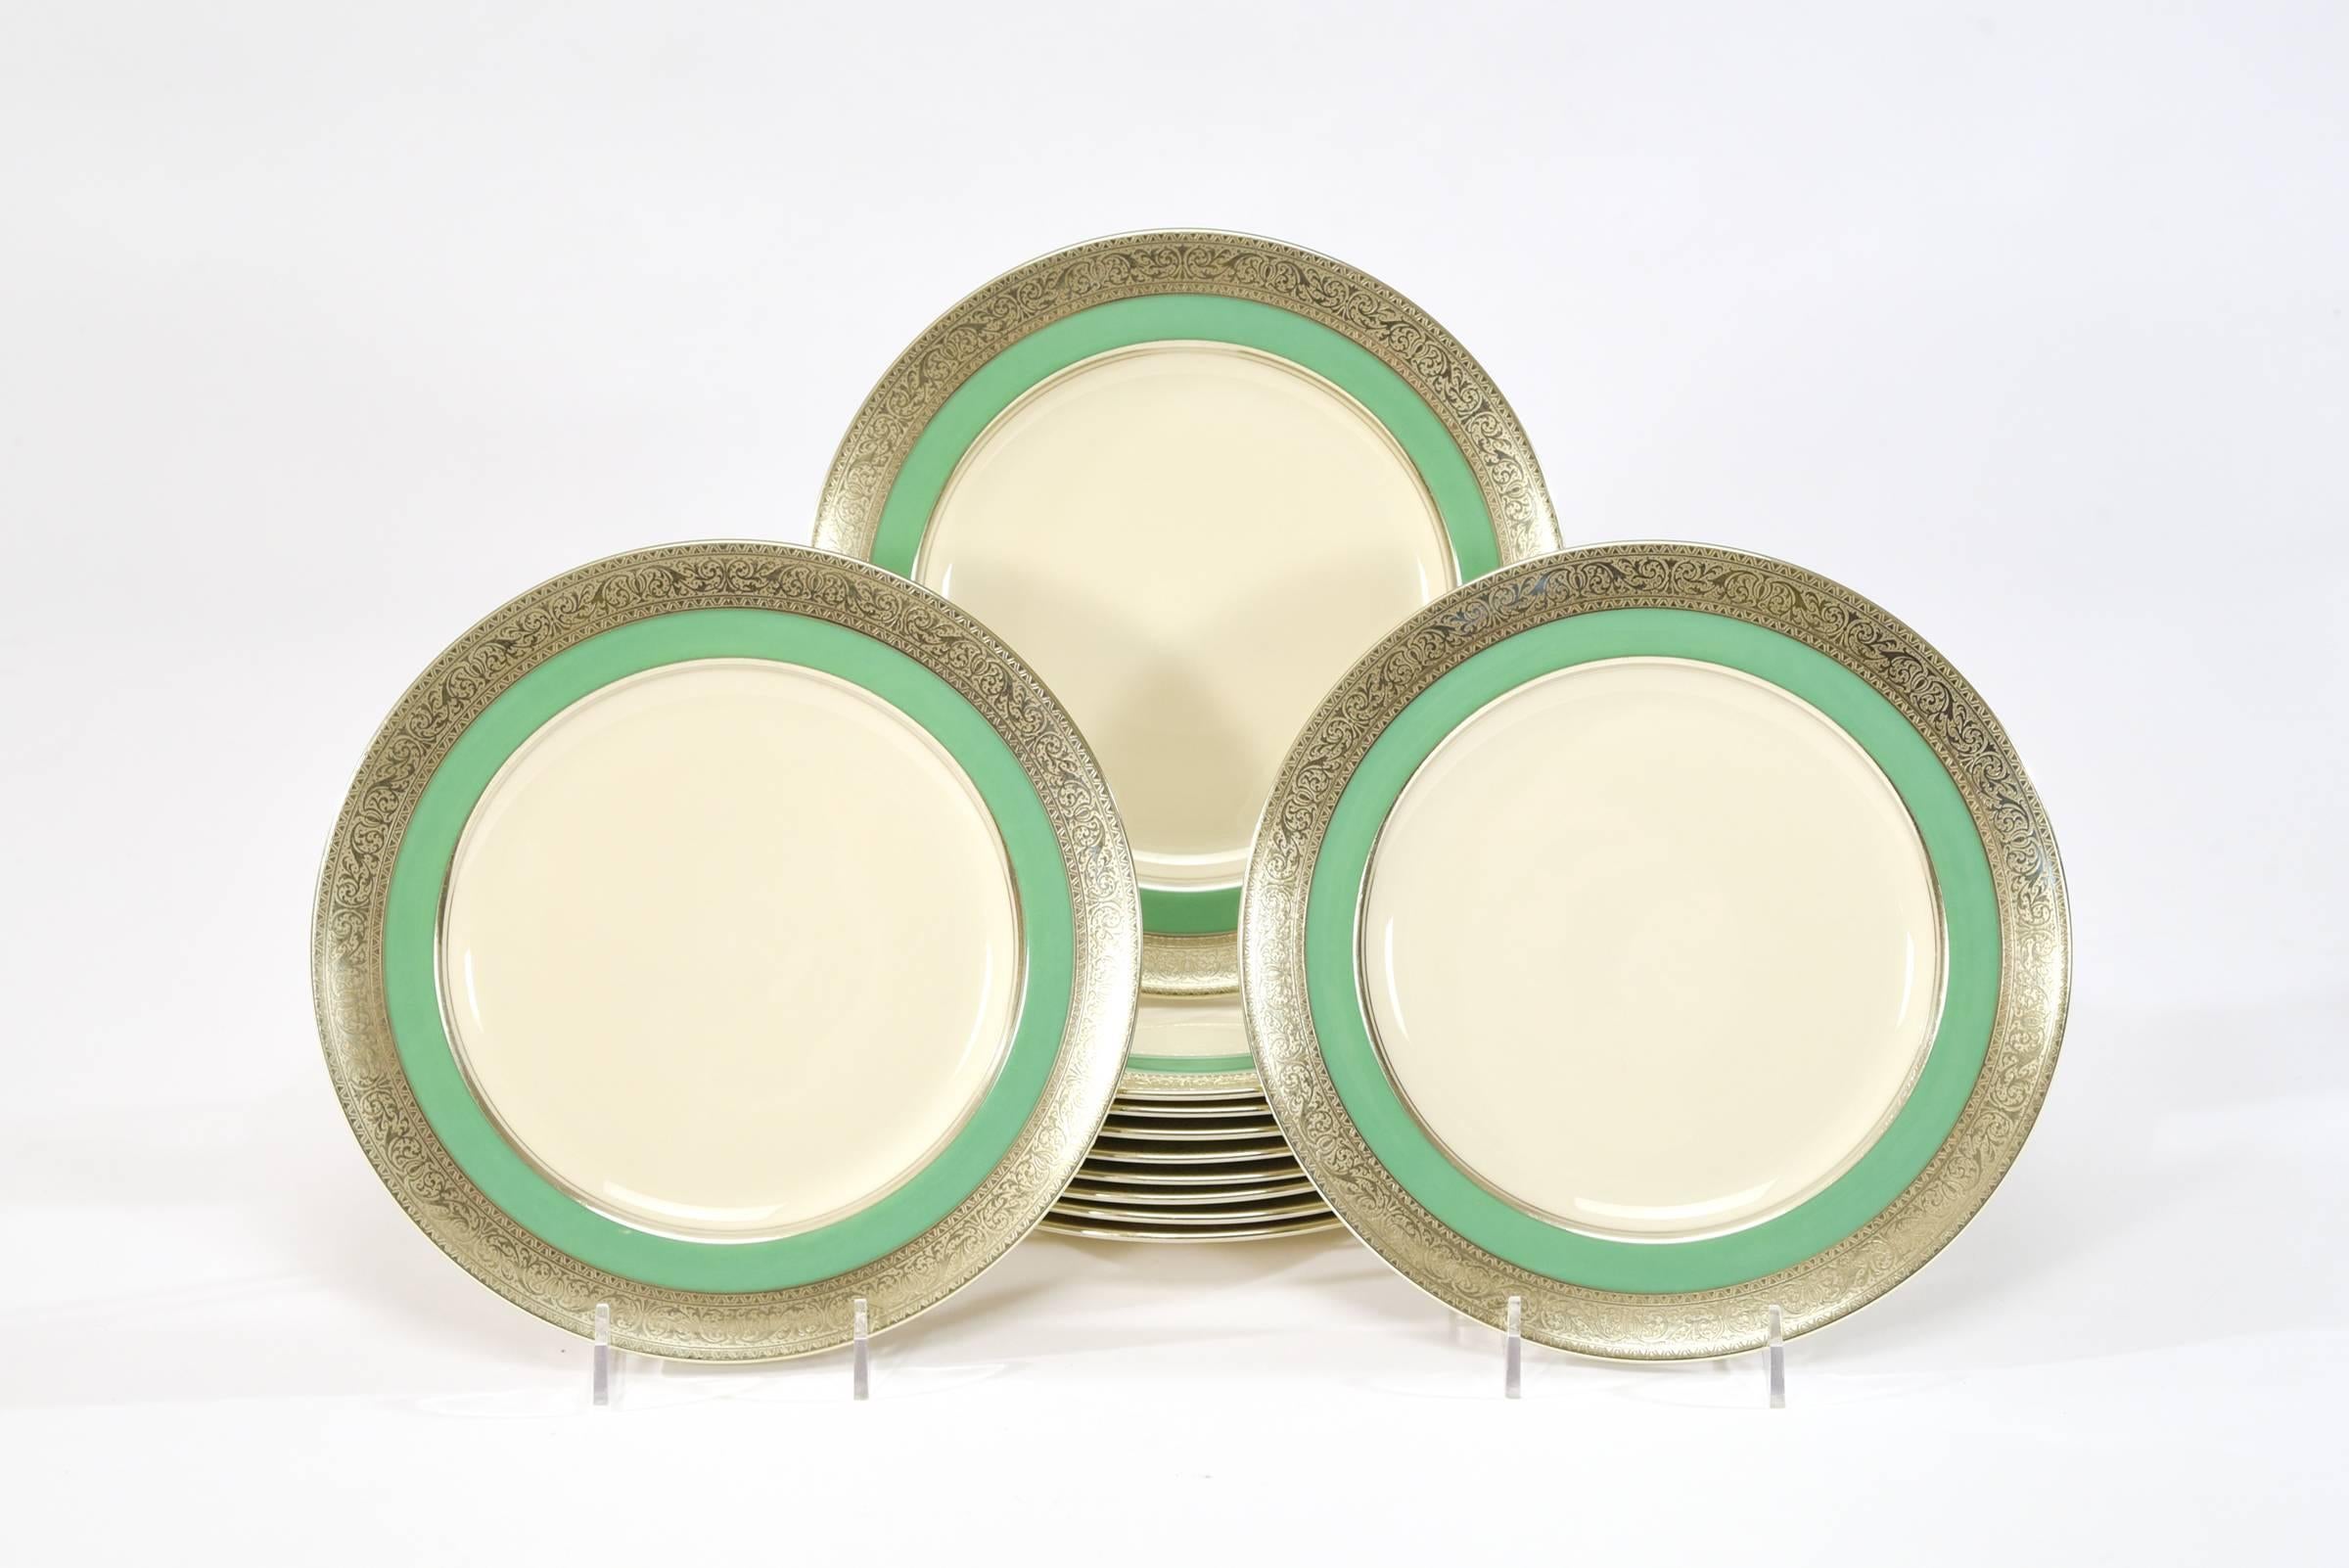 The perfect complement to the set of 12 Sterling and Welch silver overlay dinner/service plates just listed, is this set of 12 Lenox dessert or salad plates with silver overlay borders. It's as if they were made to go together! The simple and